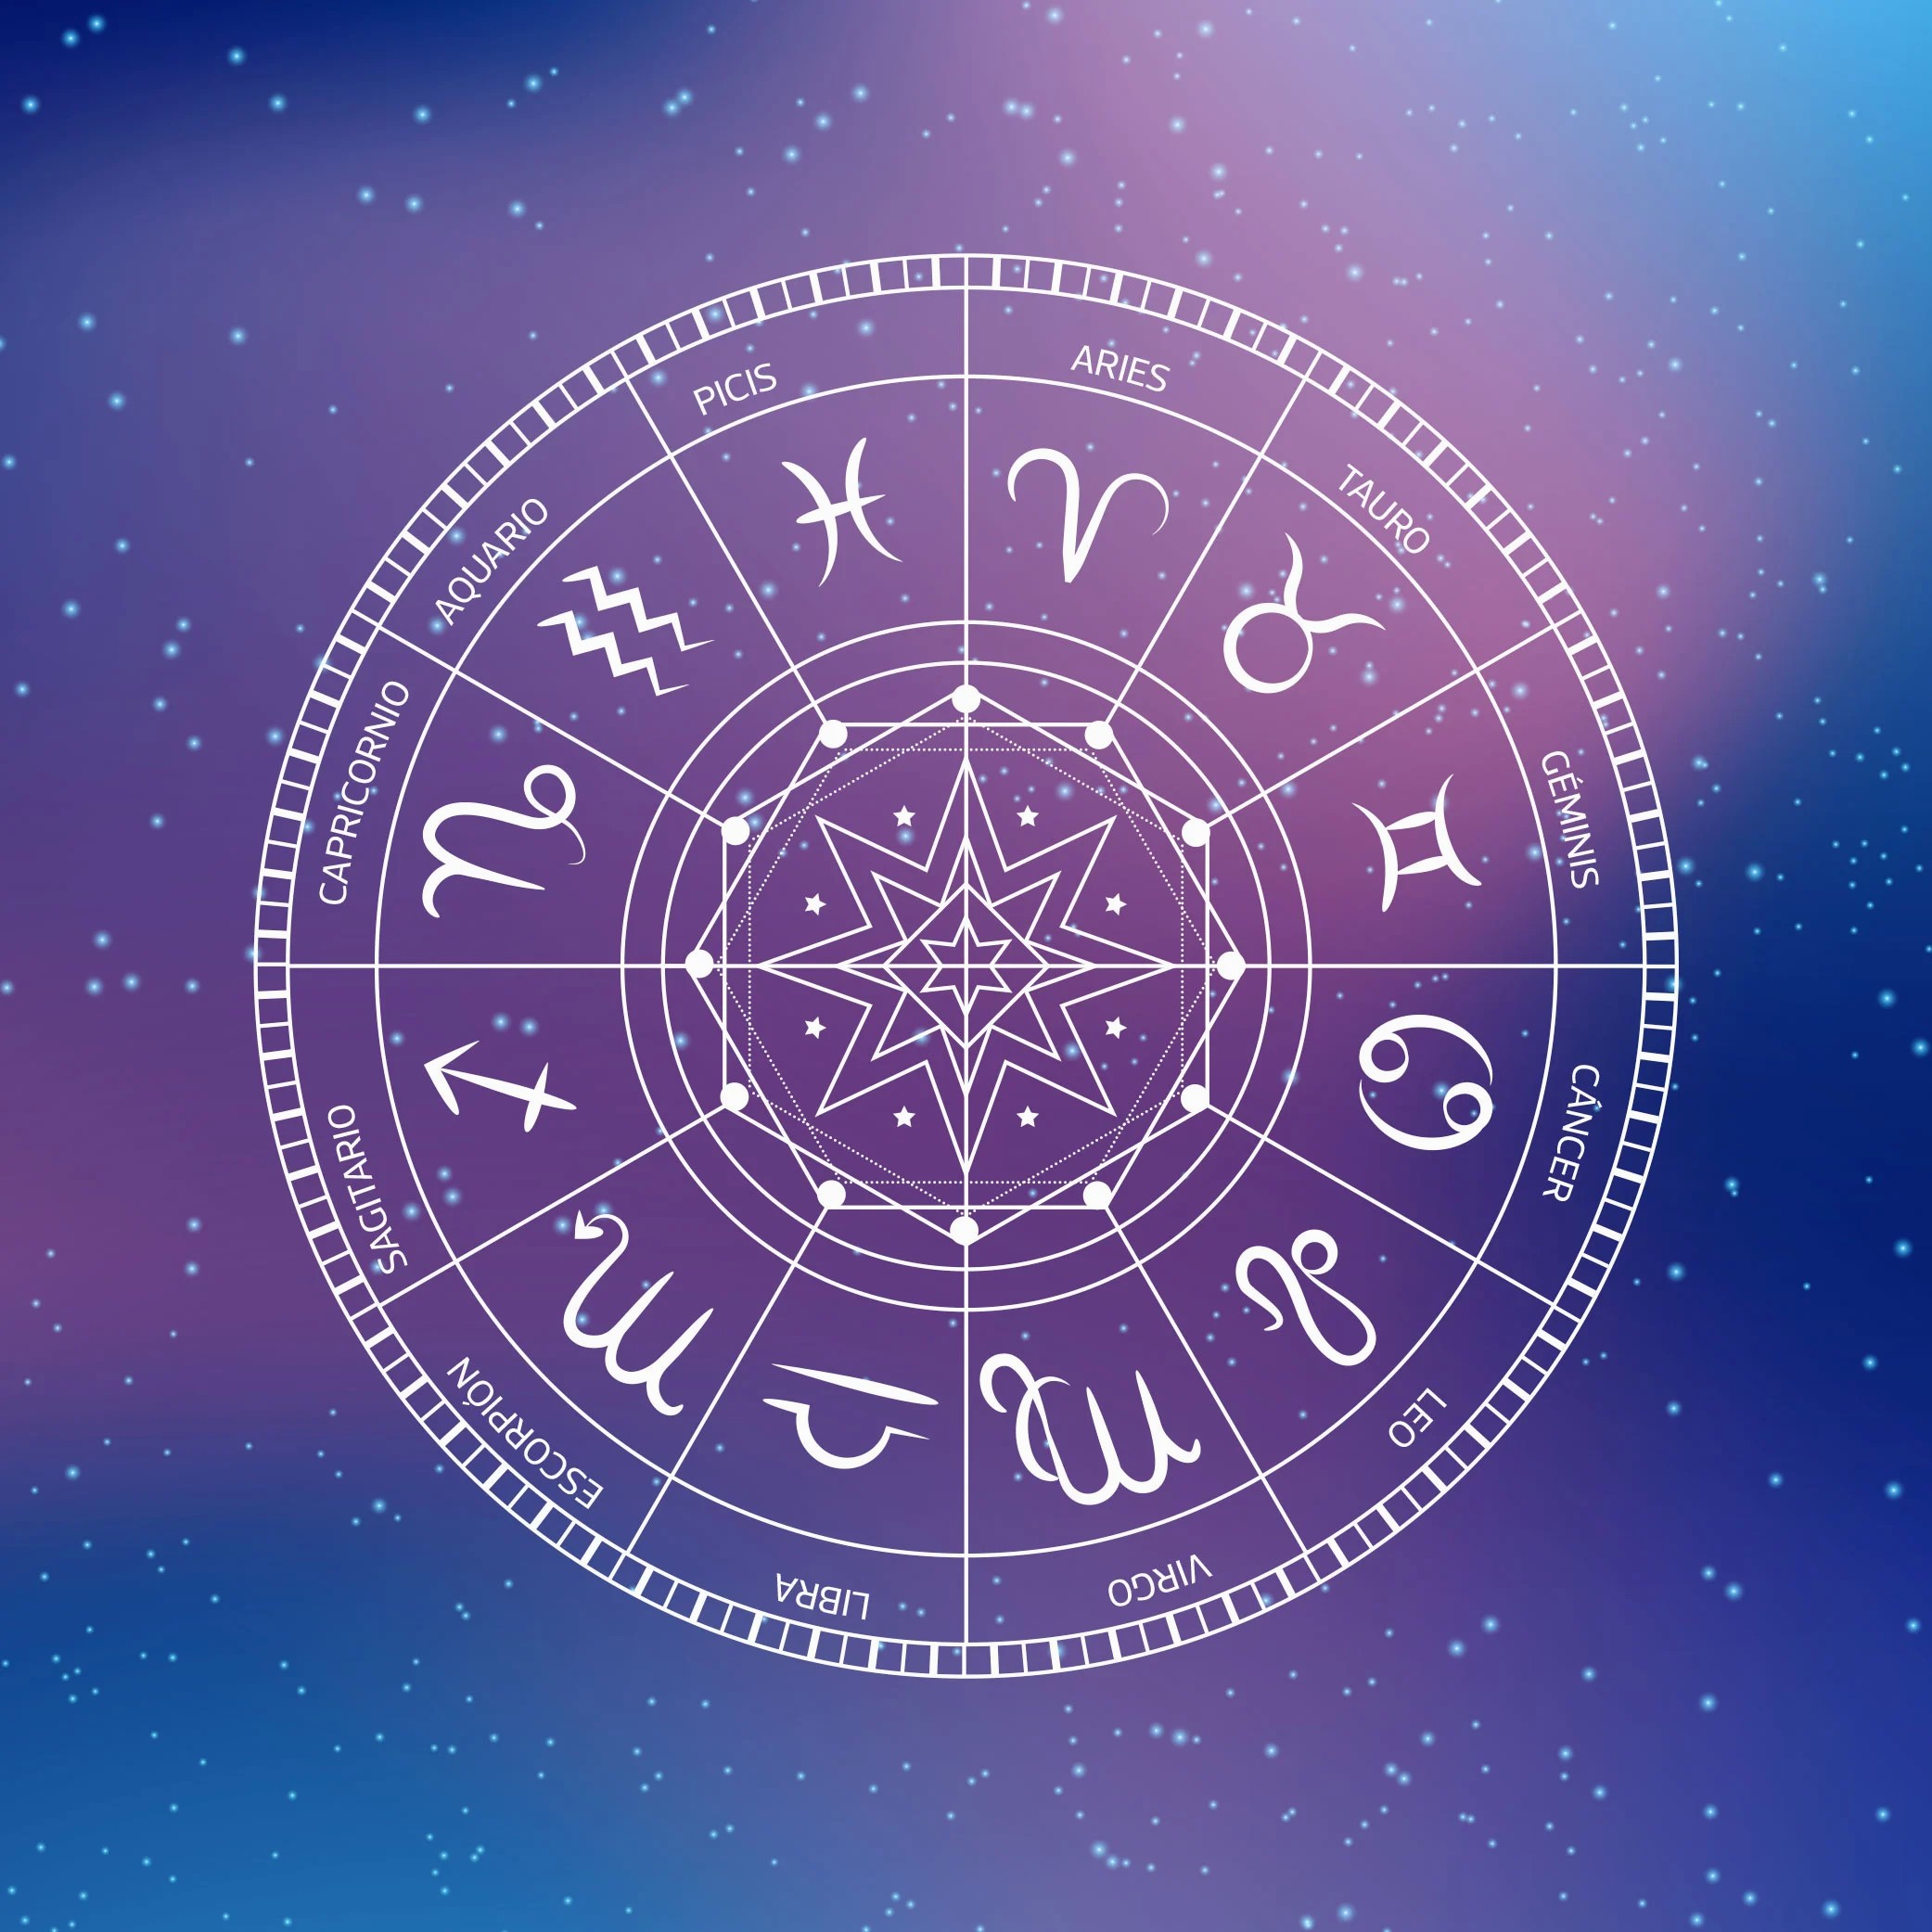 Today’s Horoscope is Saturday July 8, 2023